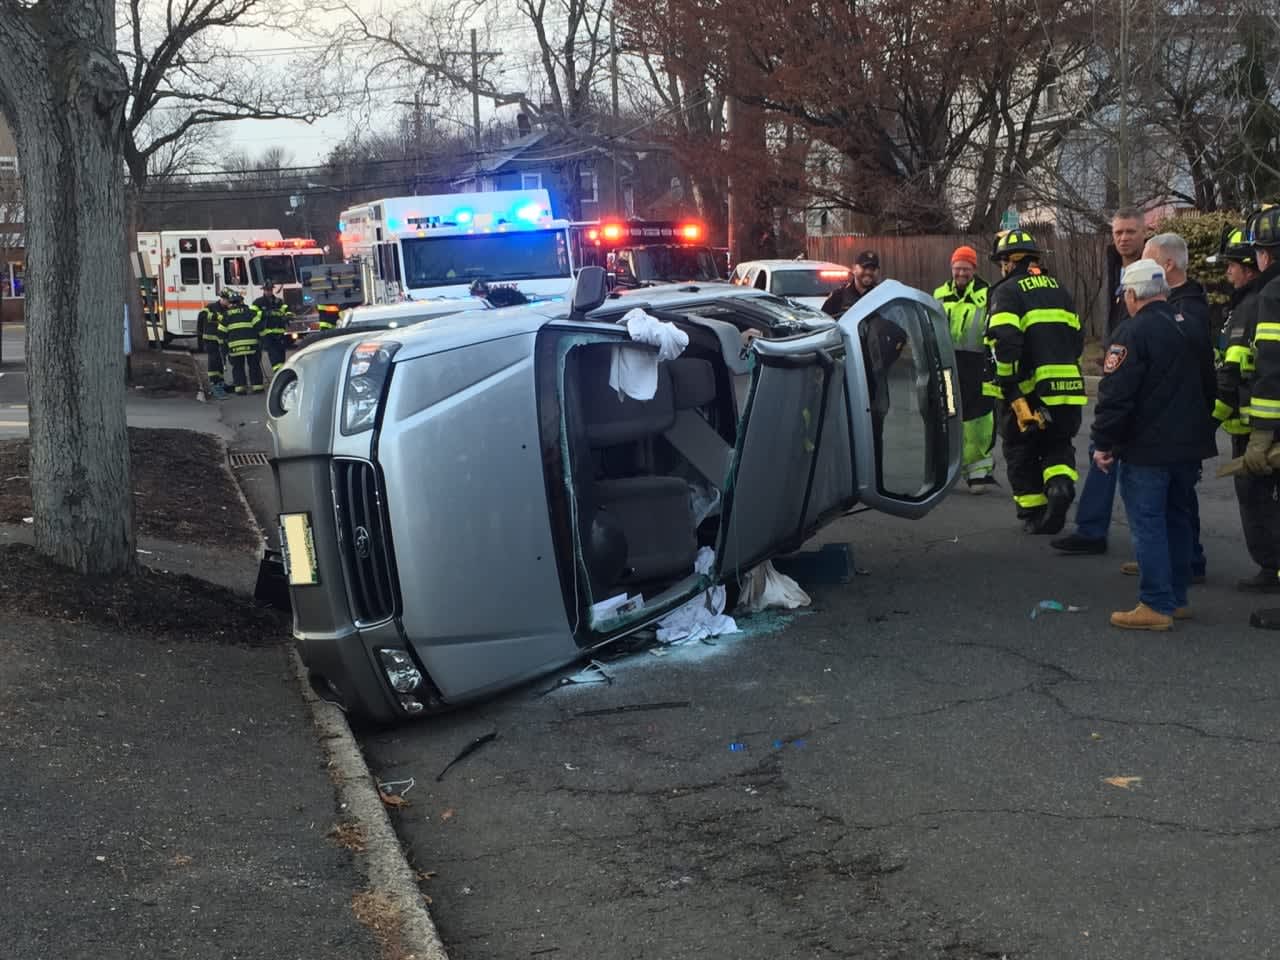 Tenafly firefighters freed the trapped driver.